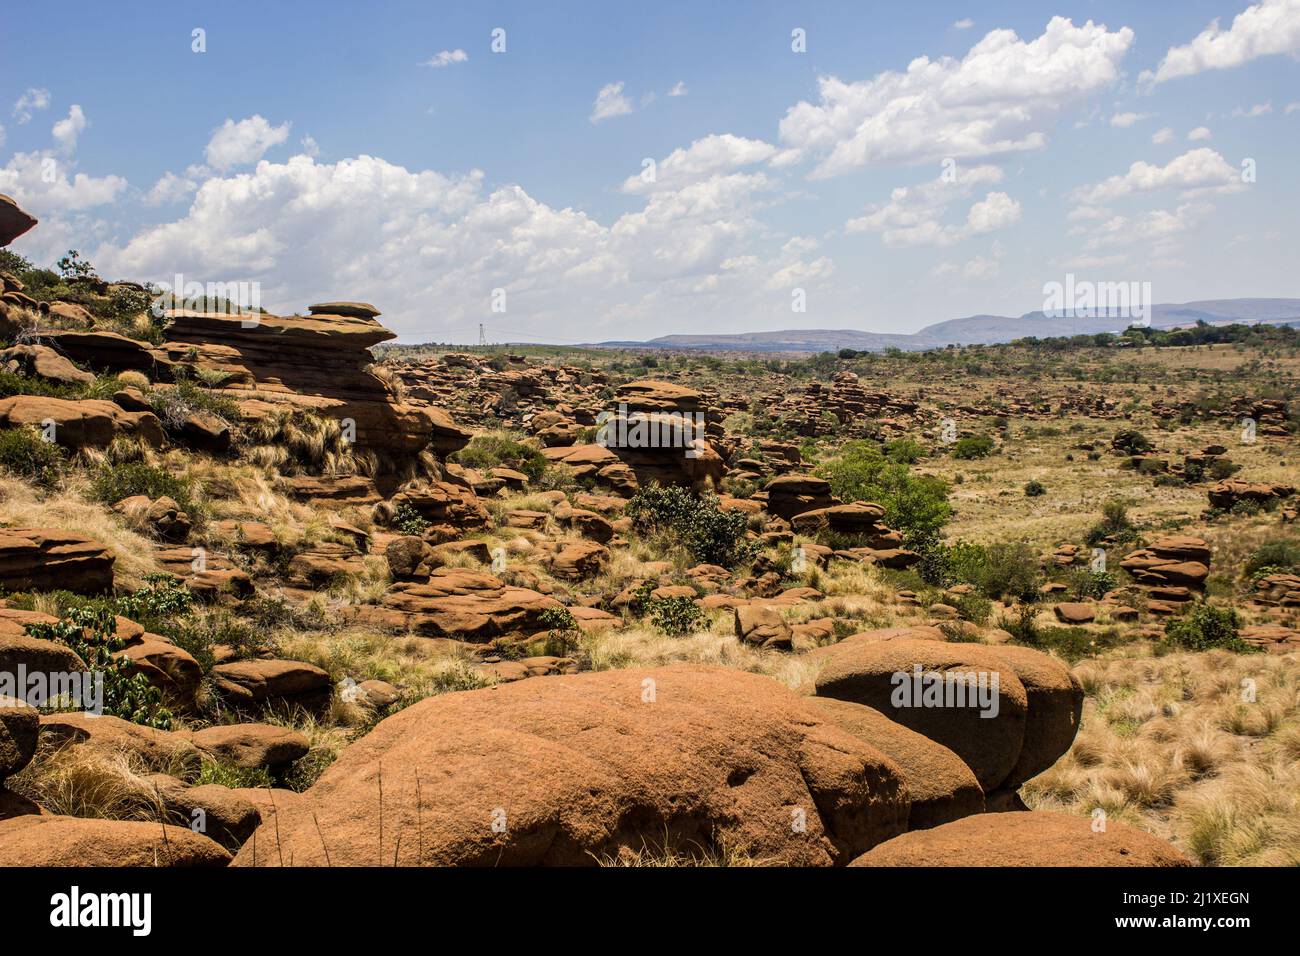 The rugged boulder strewn maze-like landscape of the Magaliesberg Mountains, of South Africa Stock Photo